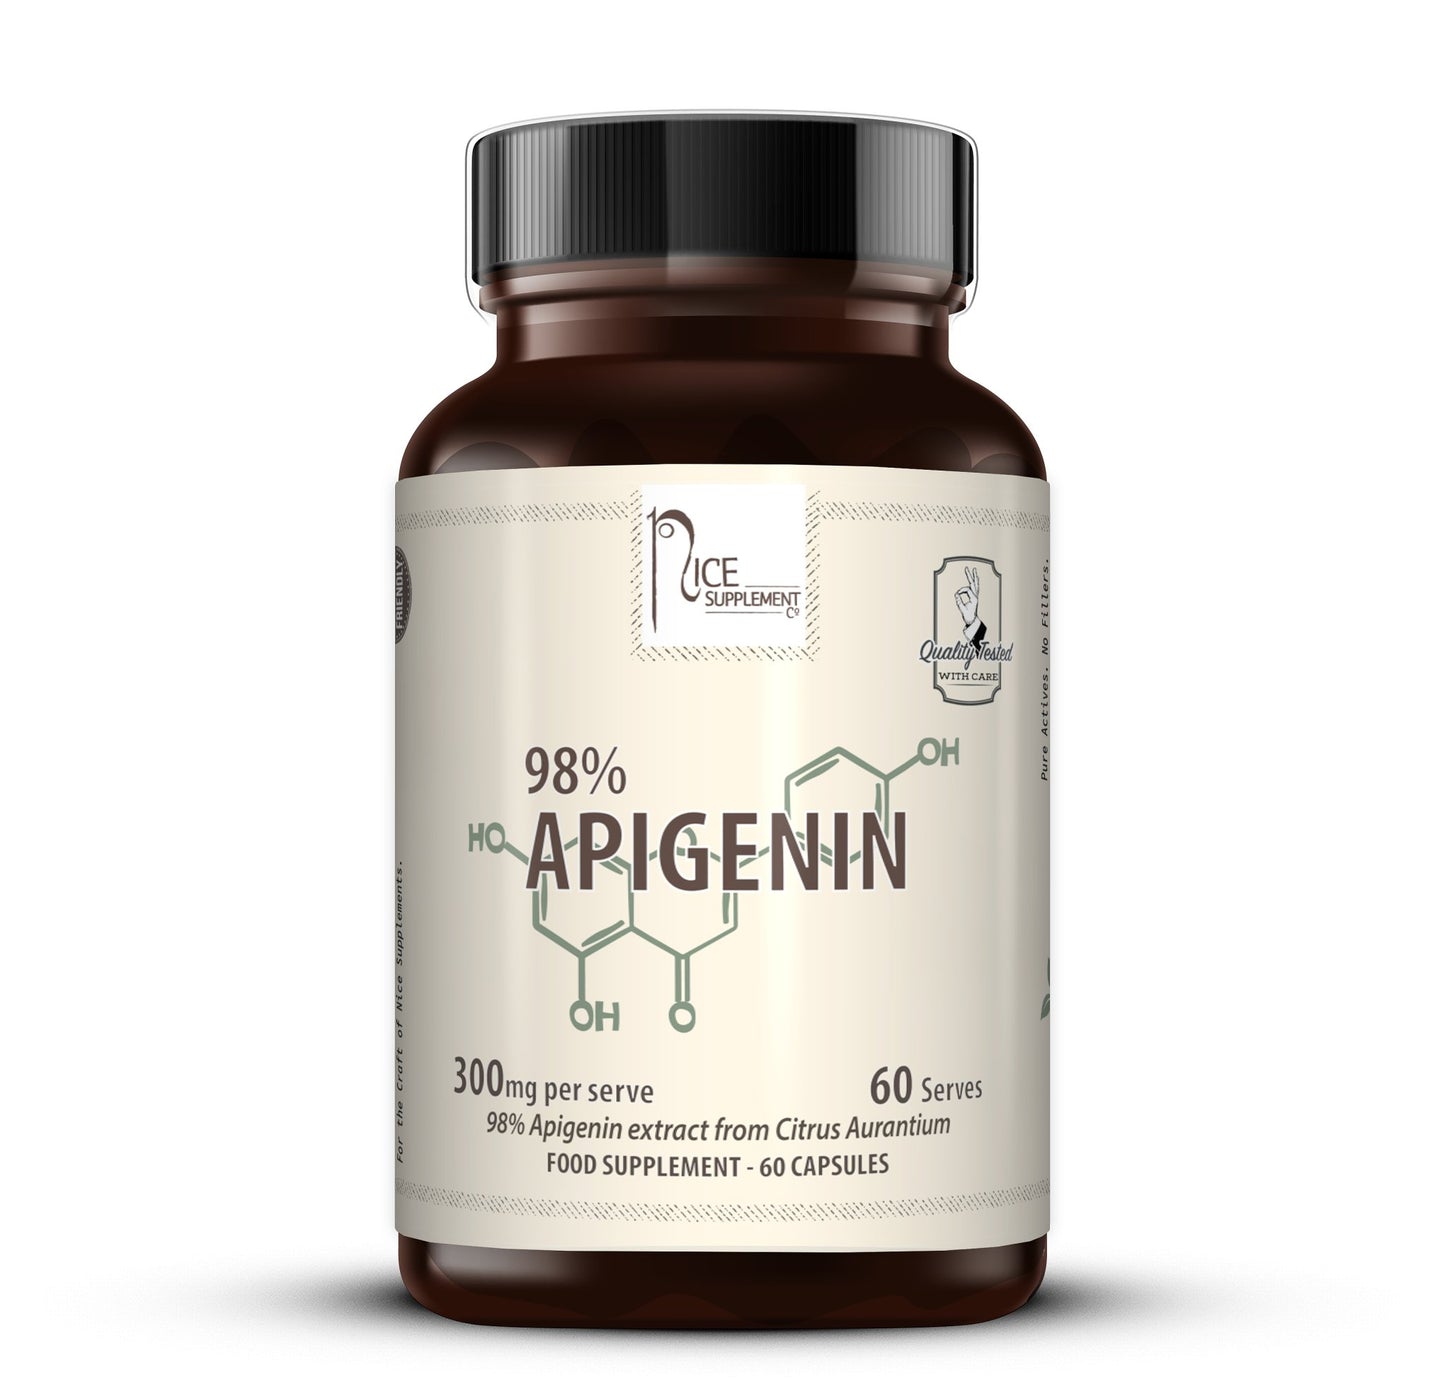 300mg Apigenin for sleep and stress - 60 Capsules - Product Image - Nice Supplement Co.